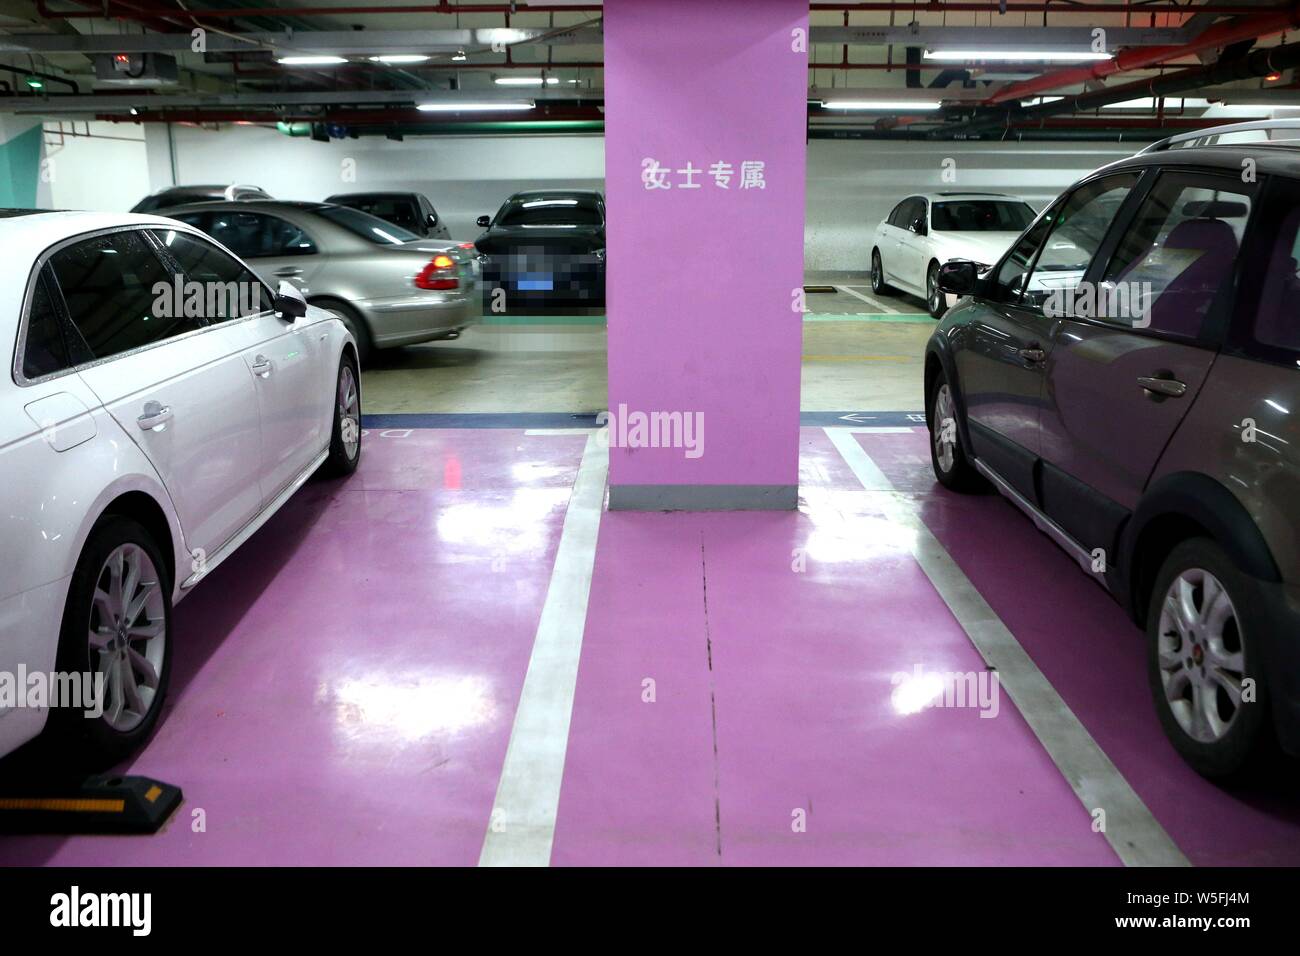 View Of Pink Parking Spaces For Female Drivers In The Parking Lot Of A Shopping Mall In Shanghai China 3 March 19 A Parking Lot At A Shopping M Stock Photo Alamy